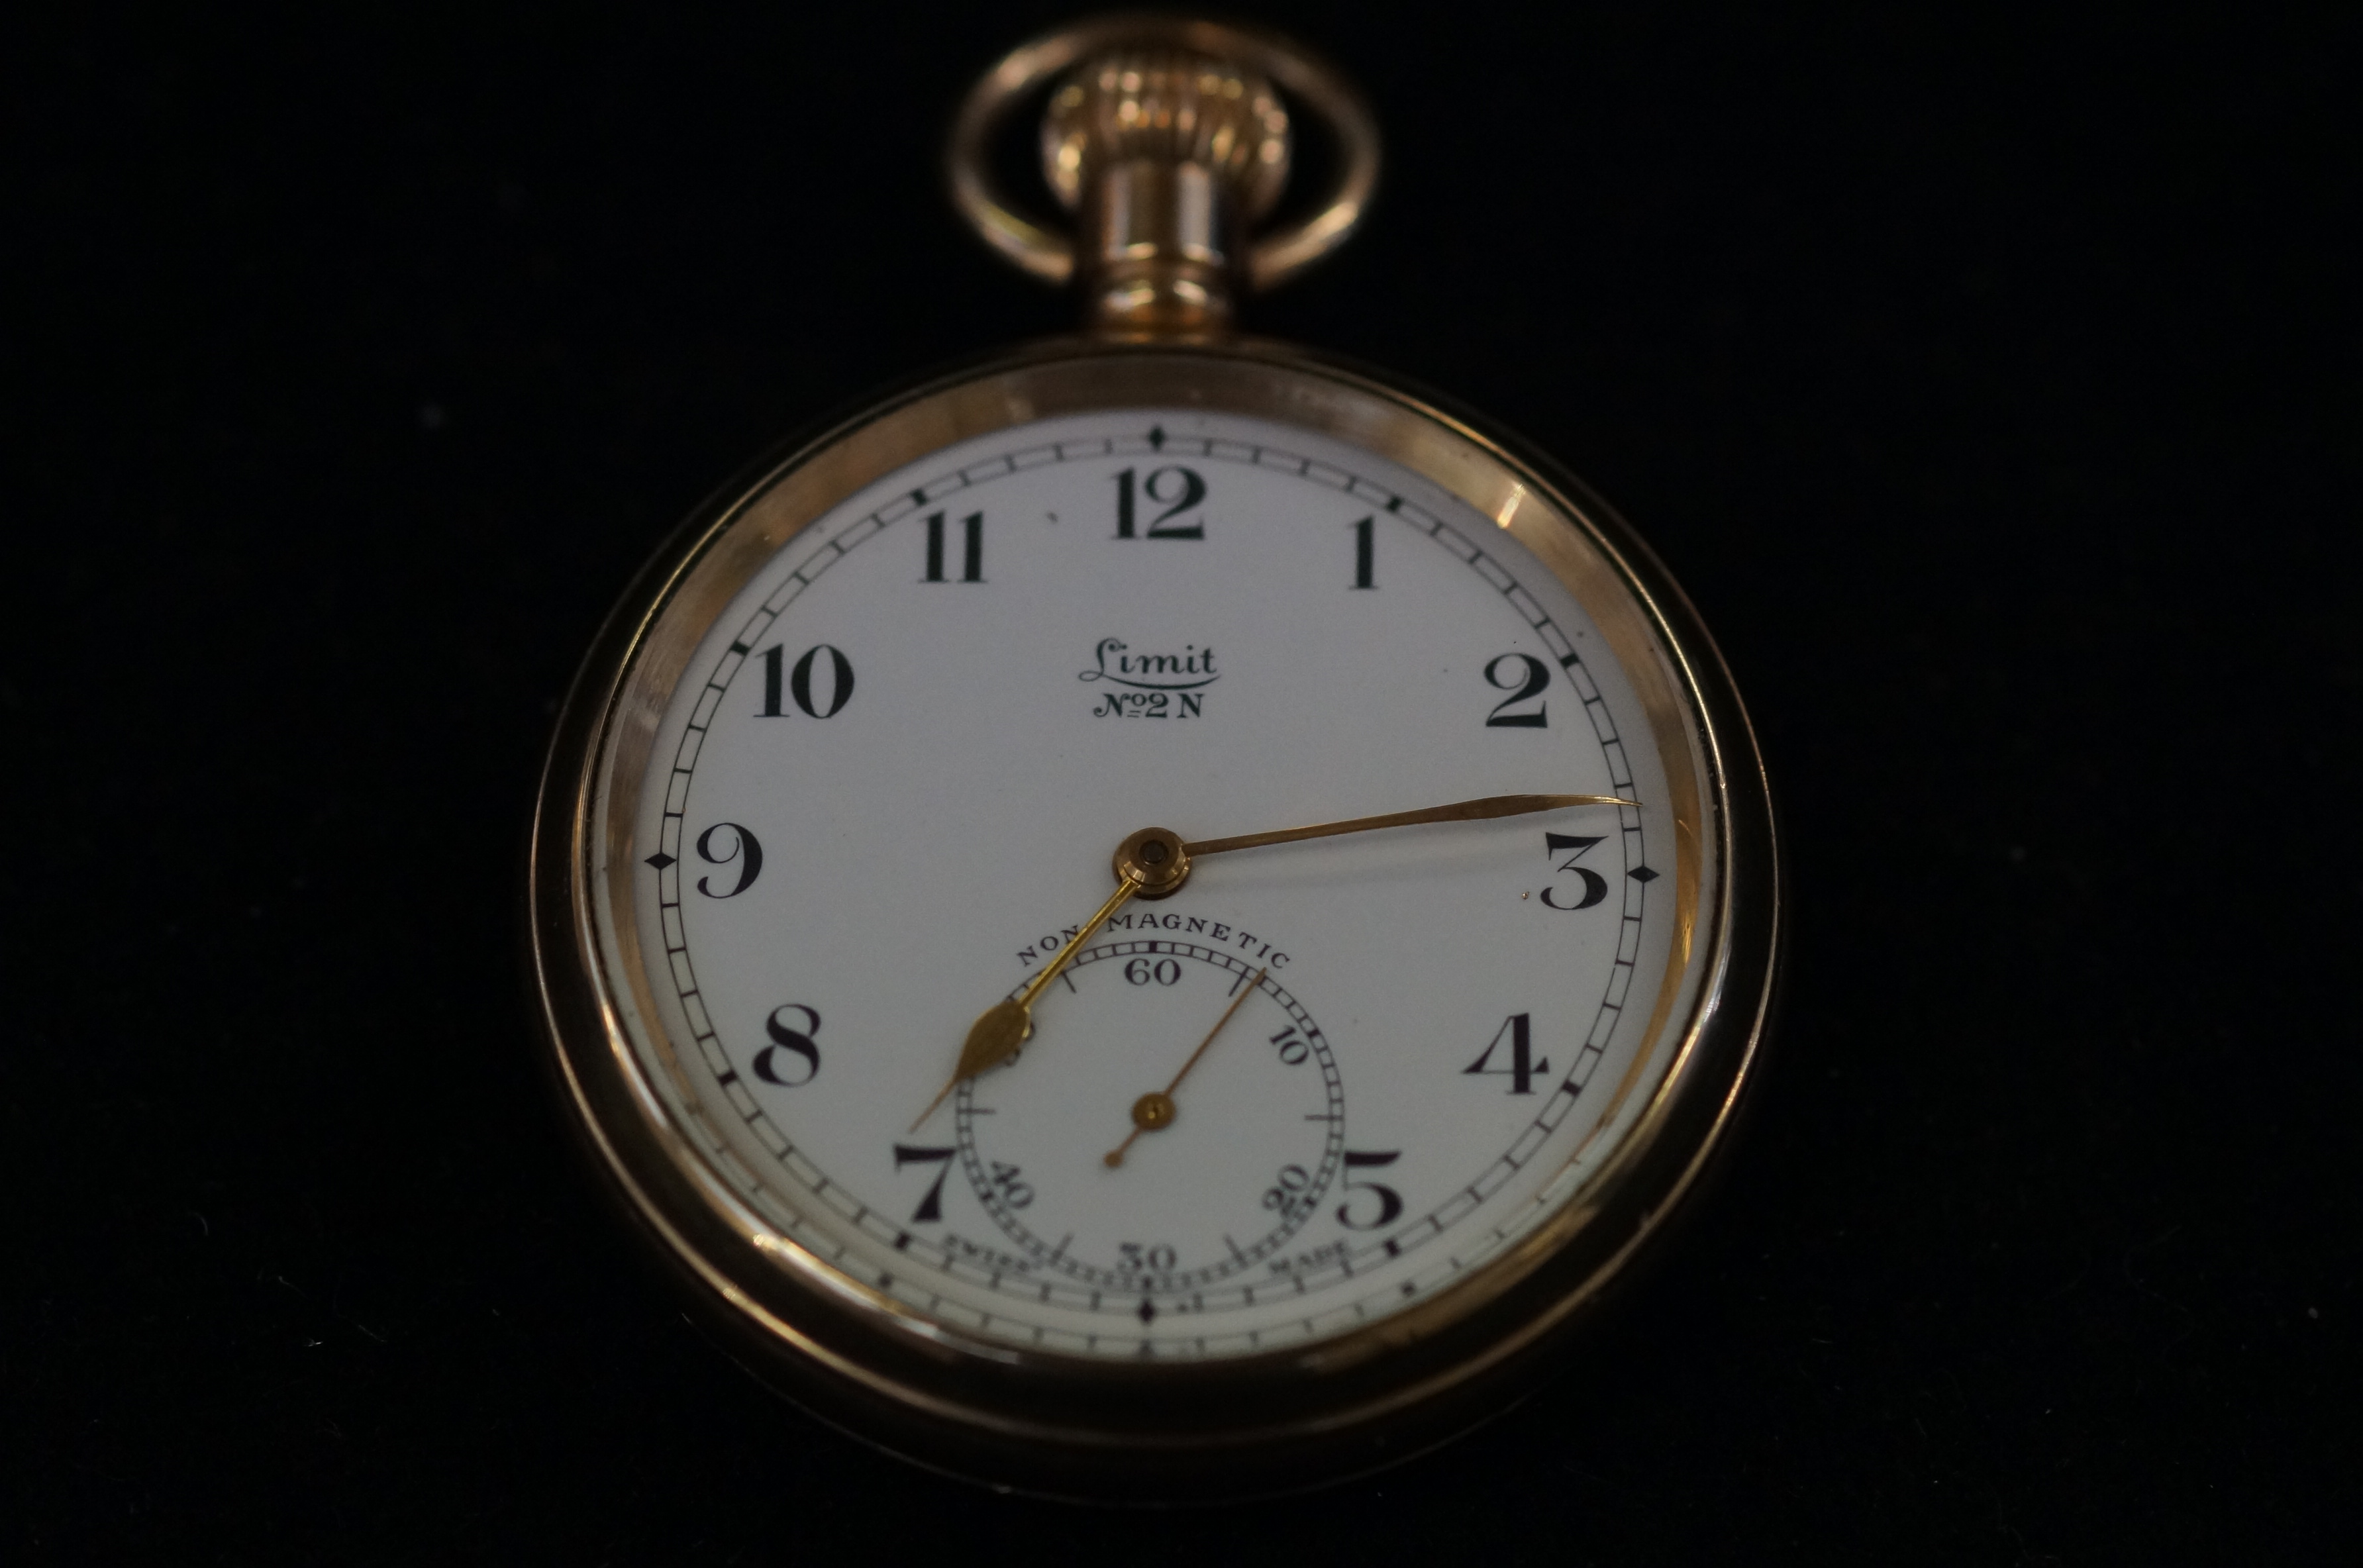 Limit No2 N pocket watch with sub second dial